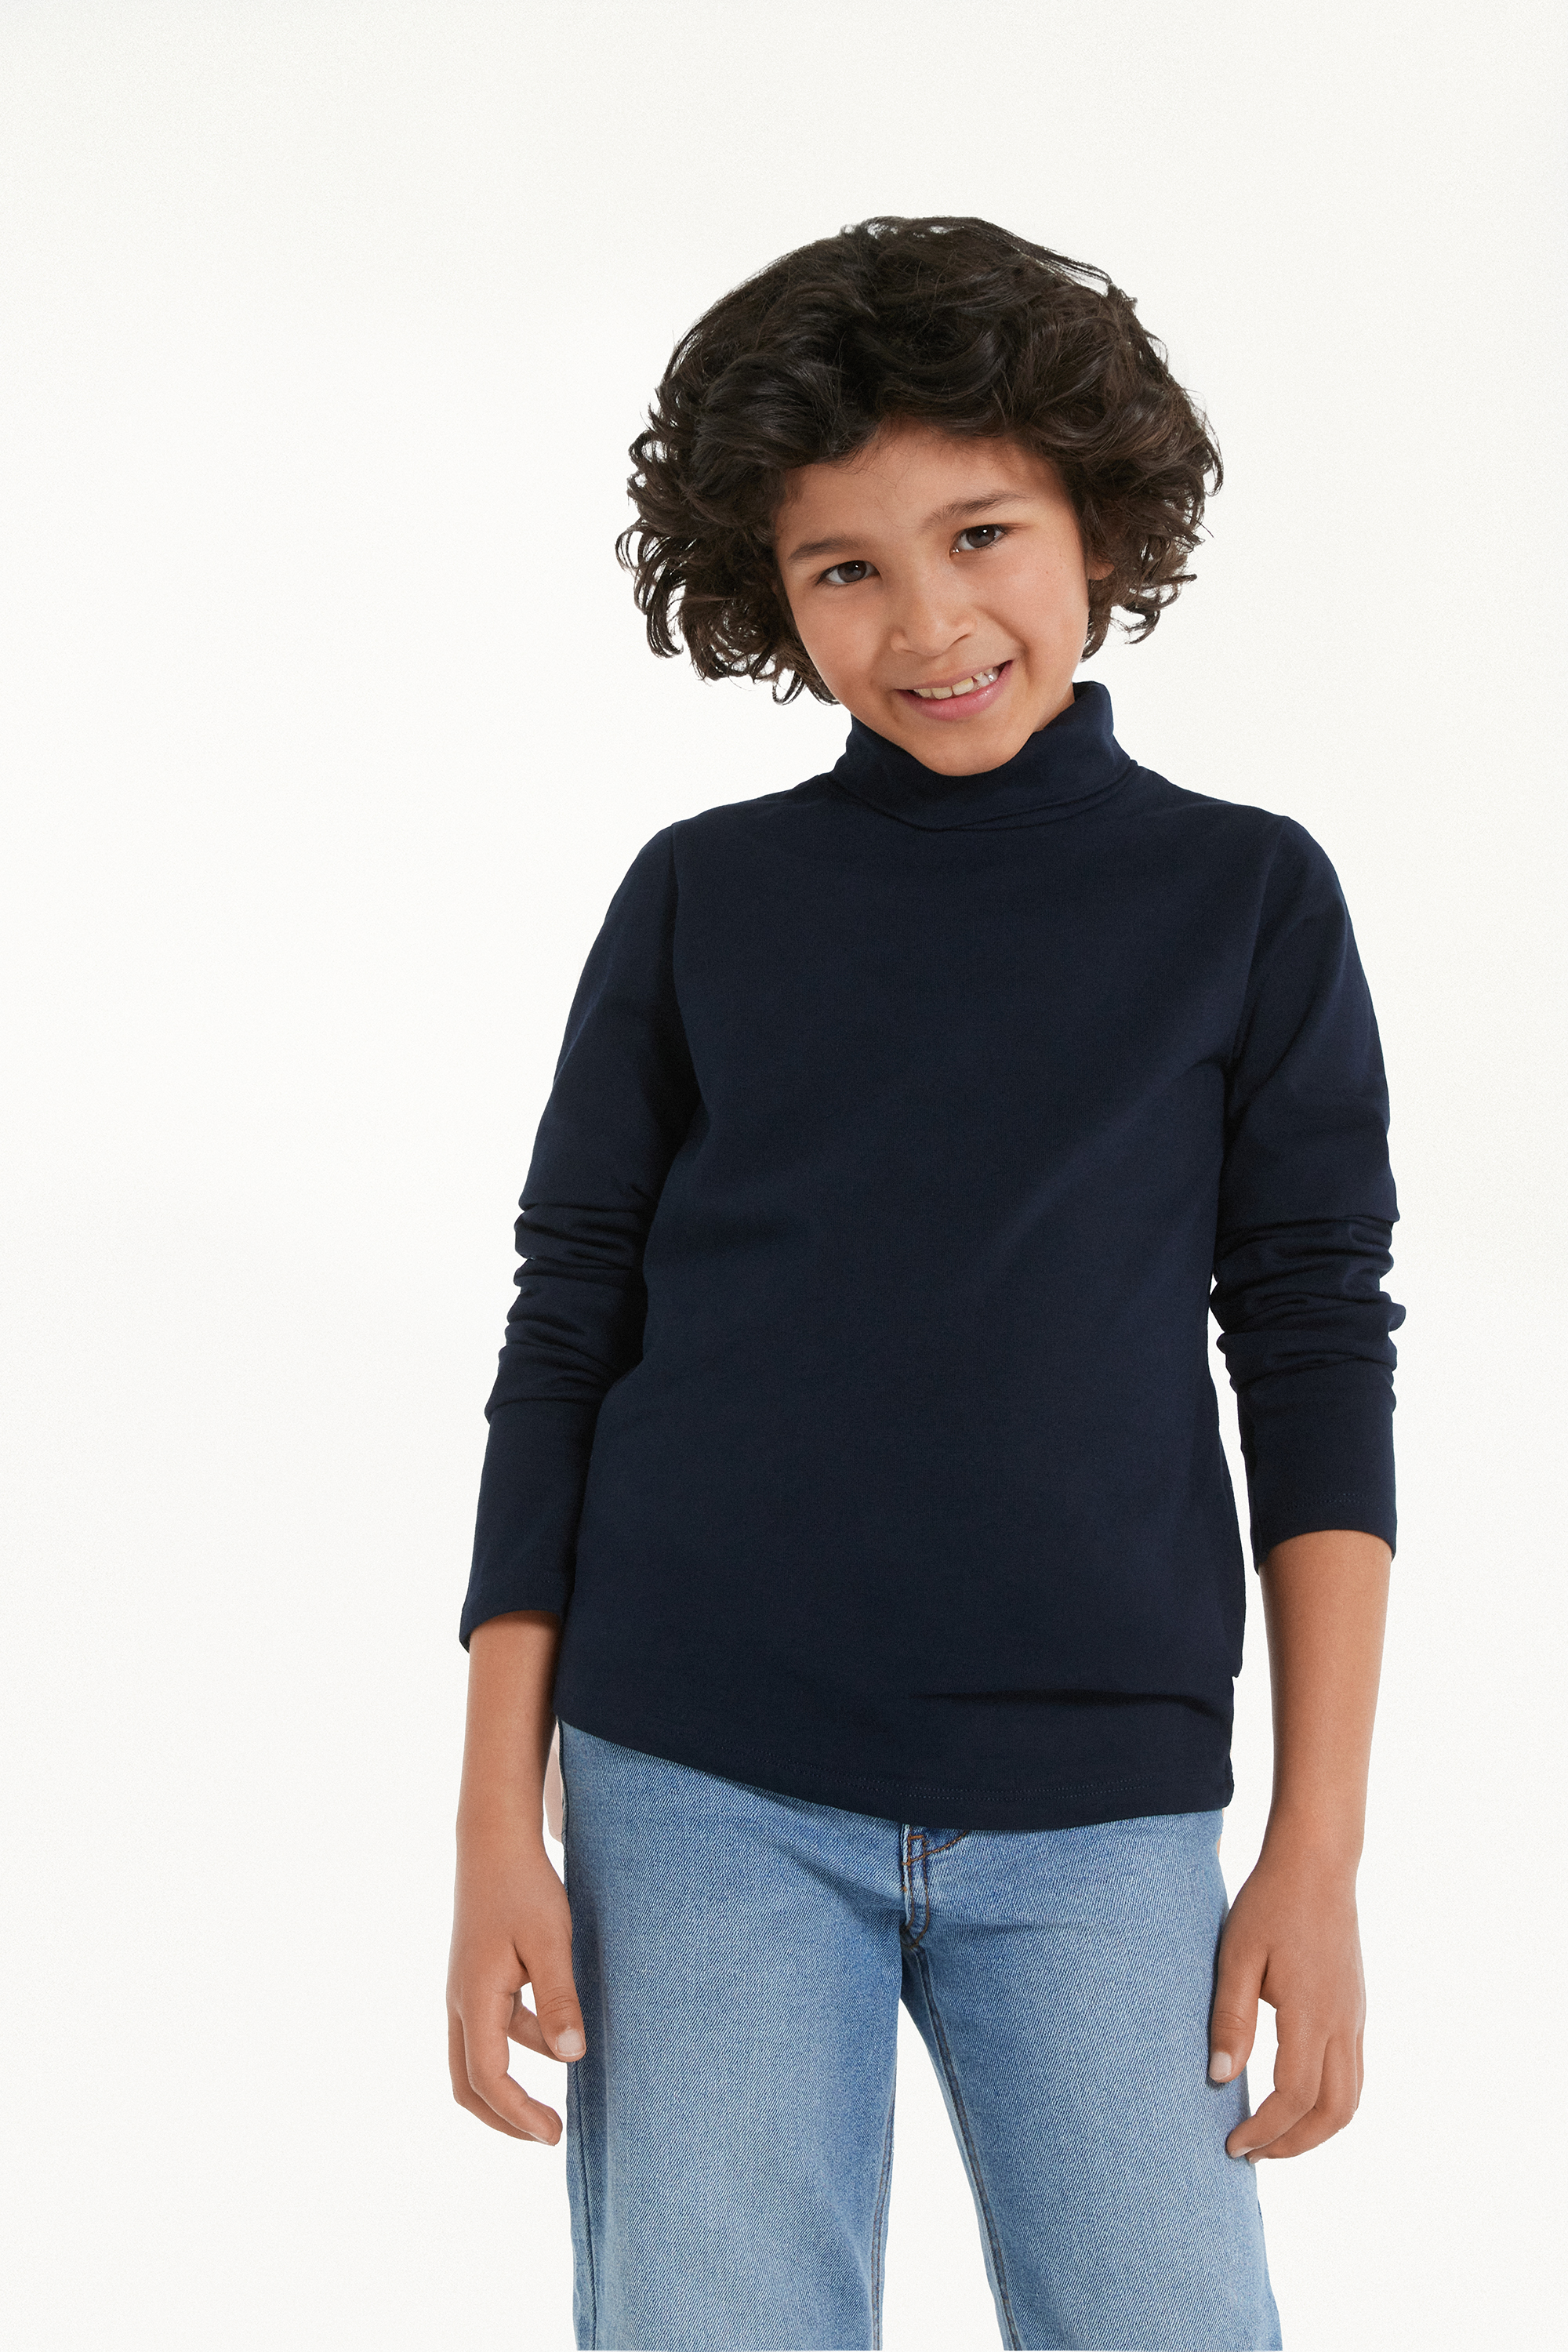 Kids’ Unisex Long-Sleeved Polo Neck Thermal Cotton Top